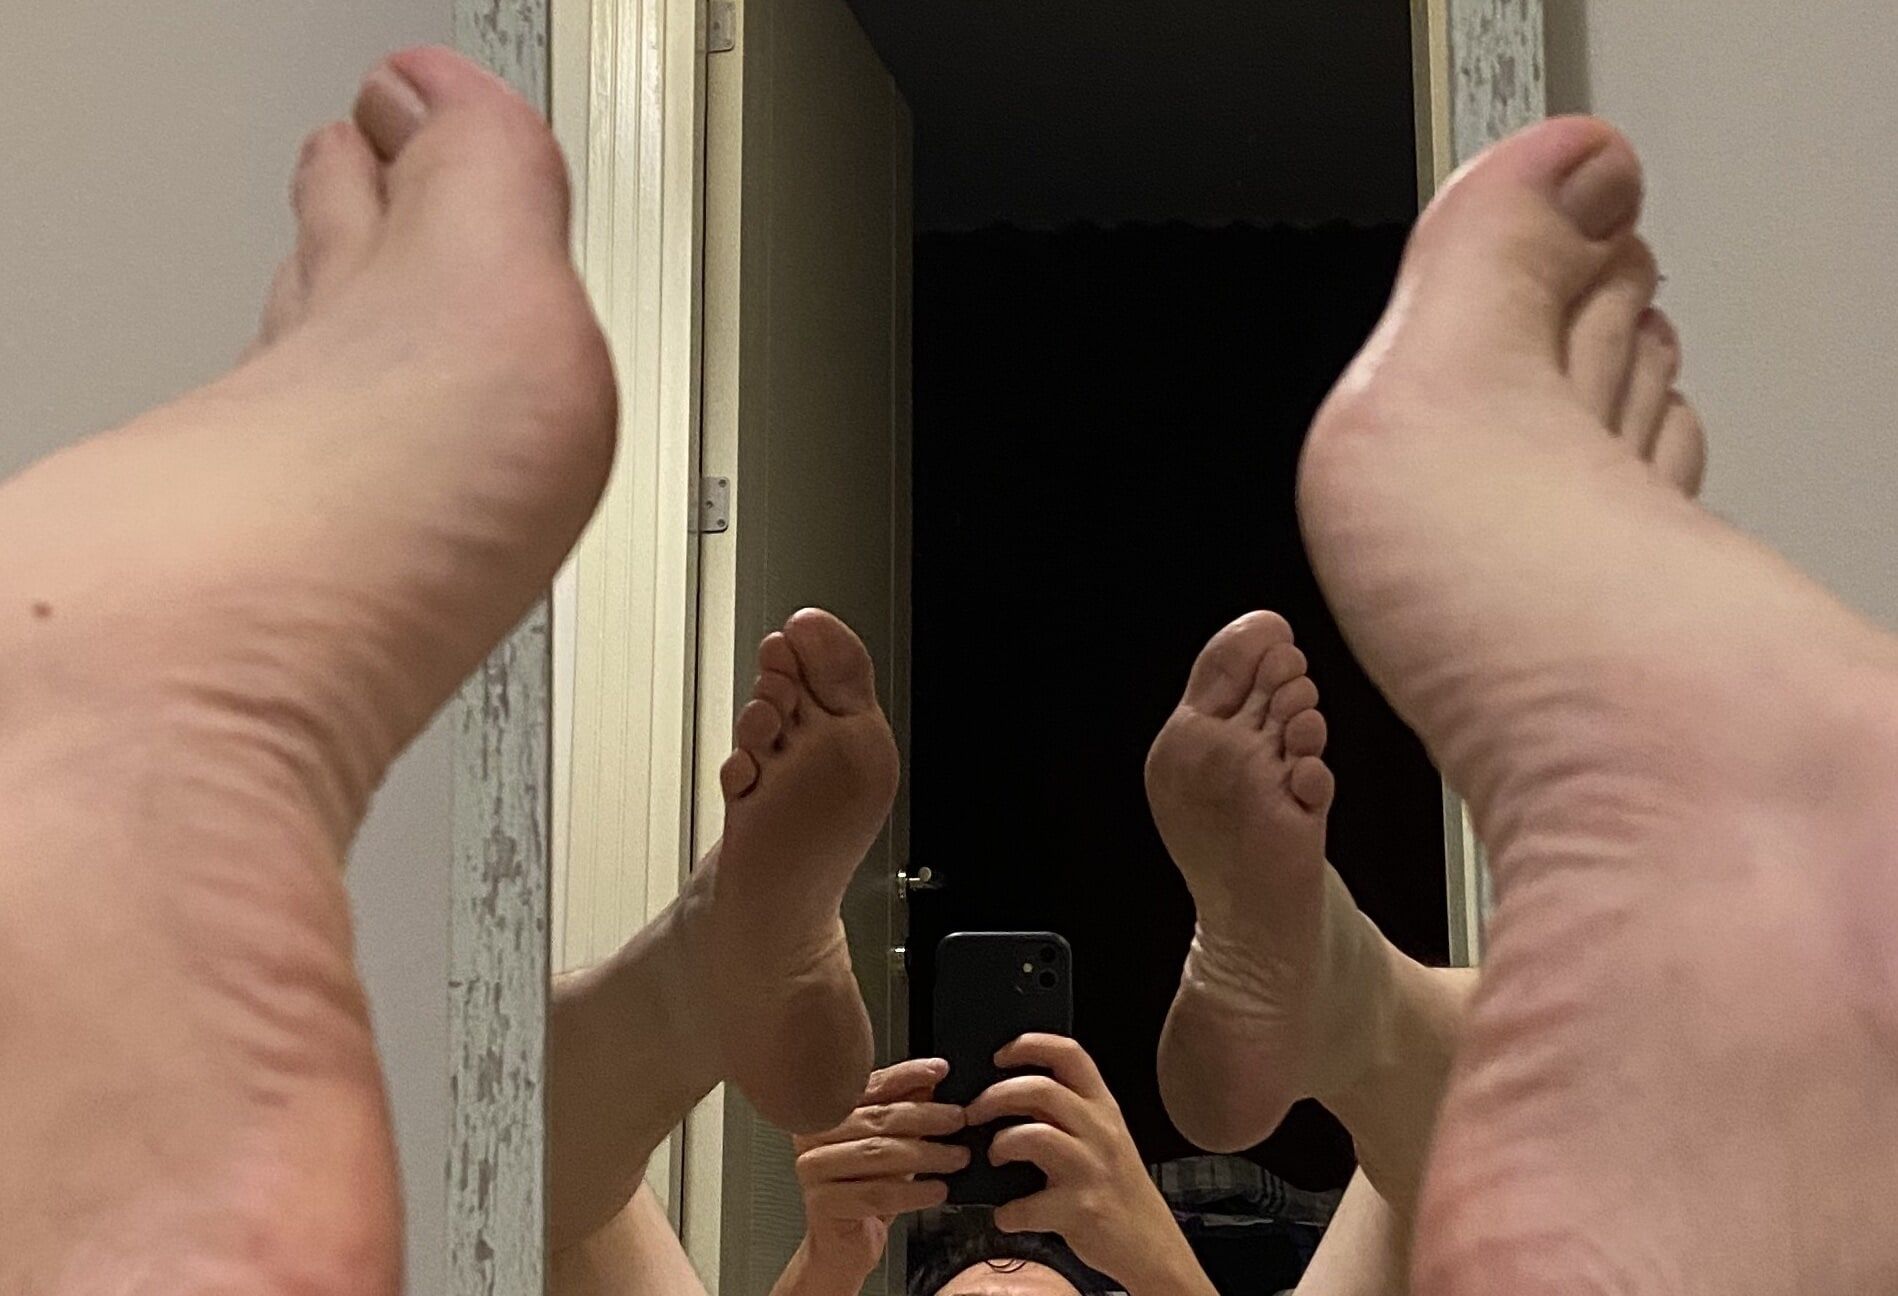 Love to see my feet in the mirror #5